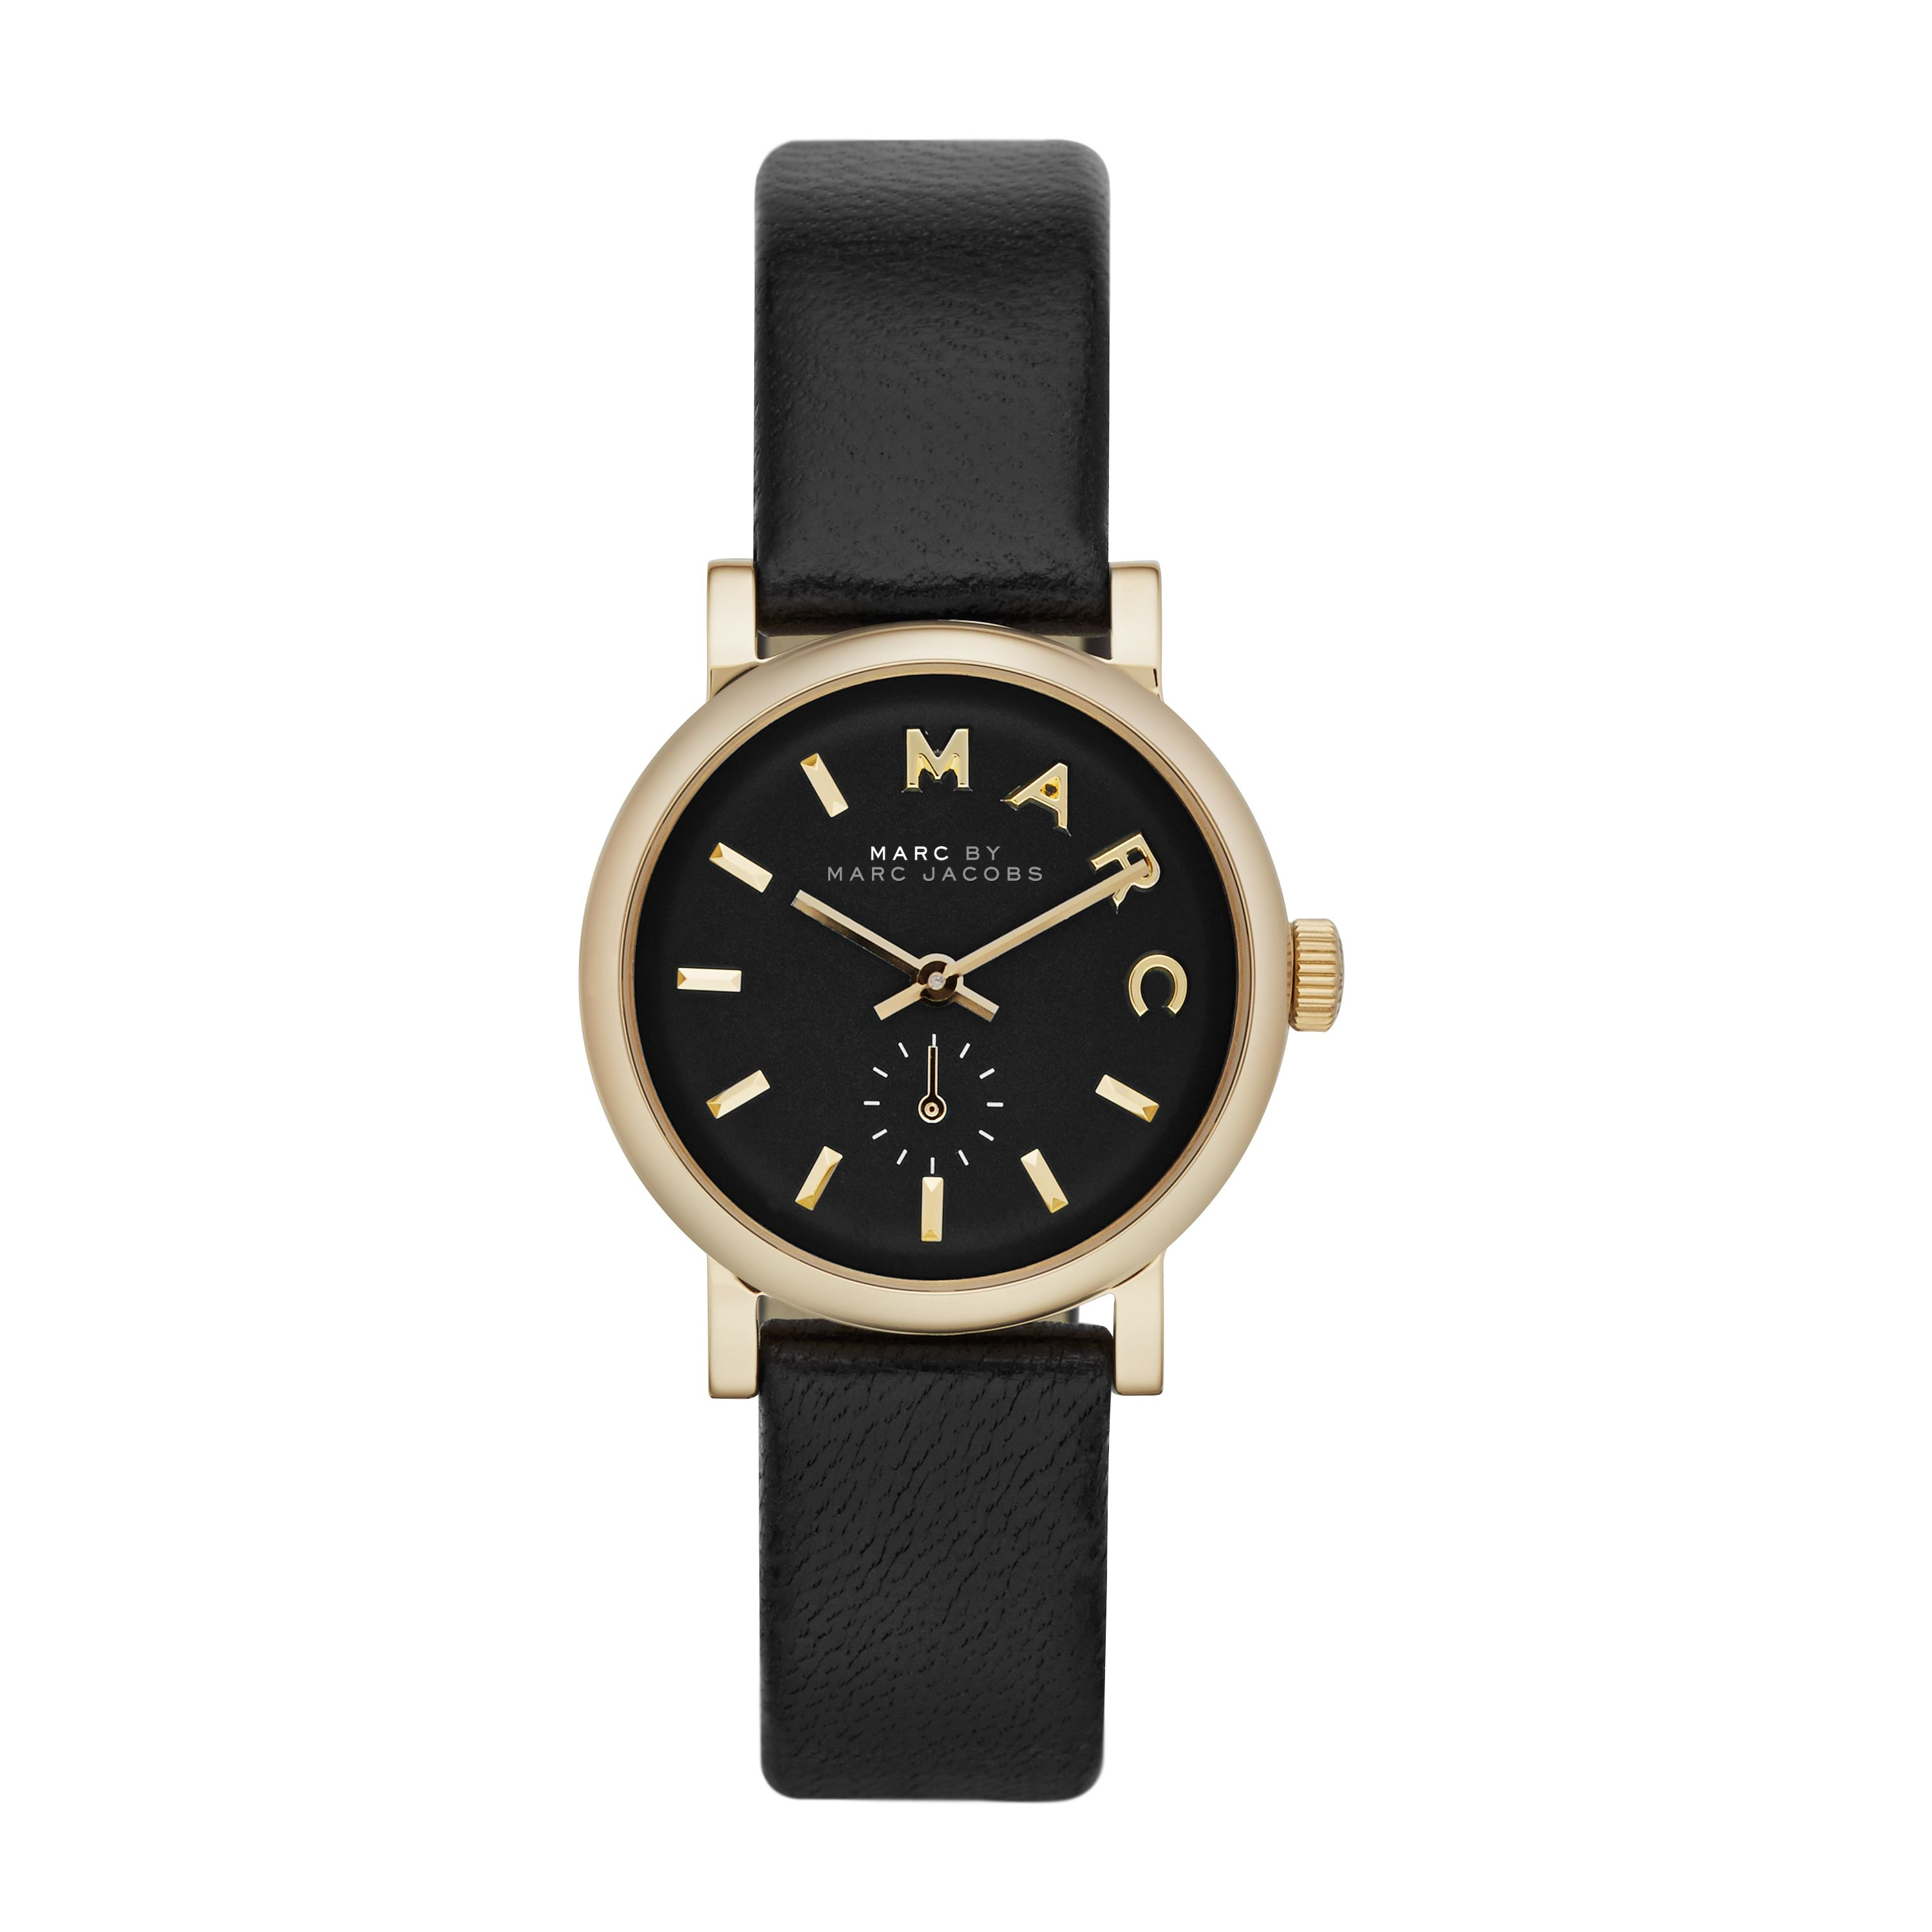 Marc by marc jacobs Mbm1273 Baker Ladies Black Leather Strap Watch in ...